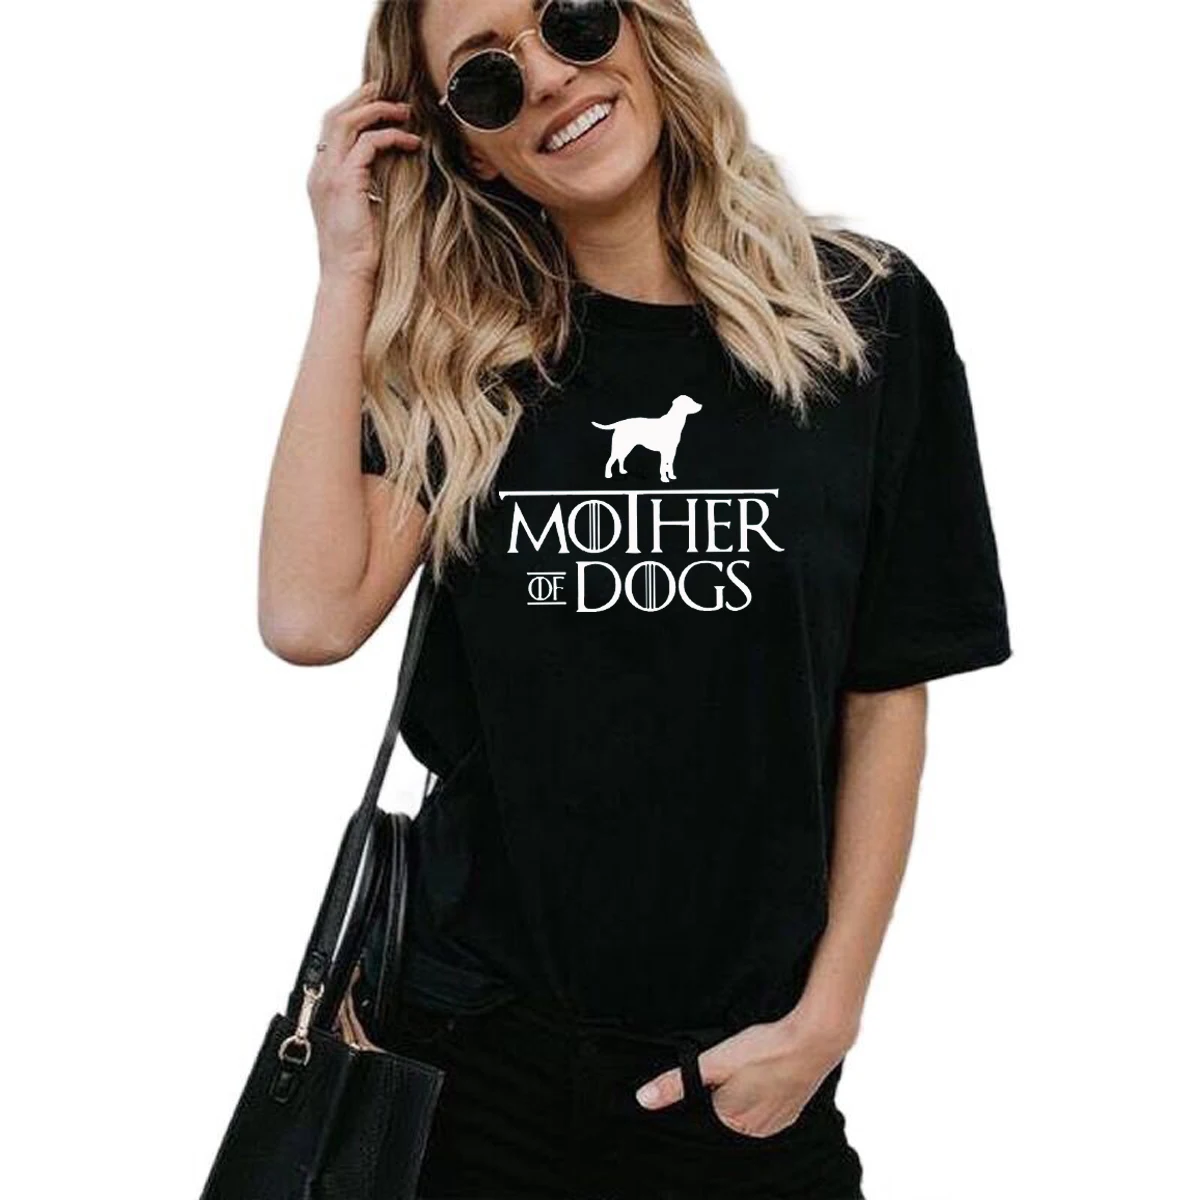 Dog Owner T-Shirt Pet Owner Funny Pet Lover Dog Puppy Doggy T-Shirt